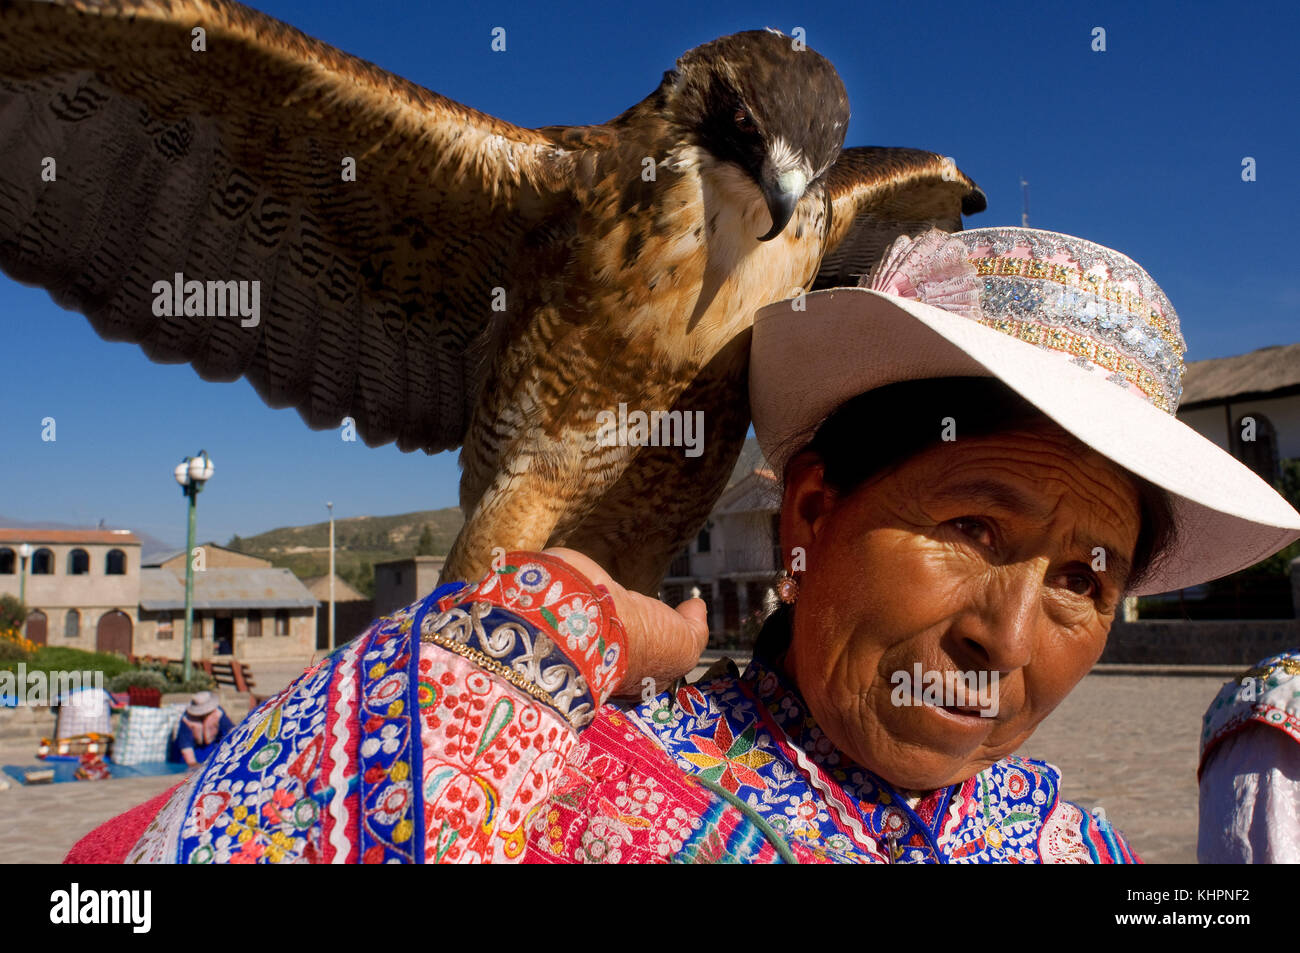 Yanke, one of the small towns in the Colca Valley where the vendors liven up the sale by photographing themselves with their eaglets, owls and llamas. Stock Photo